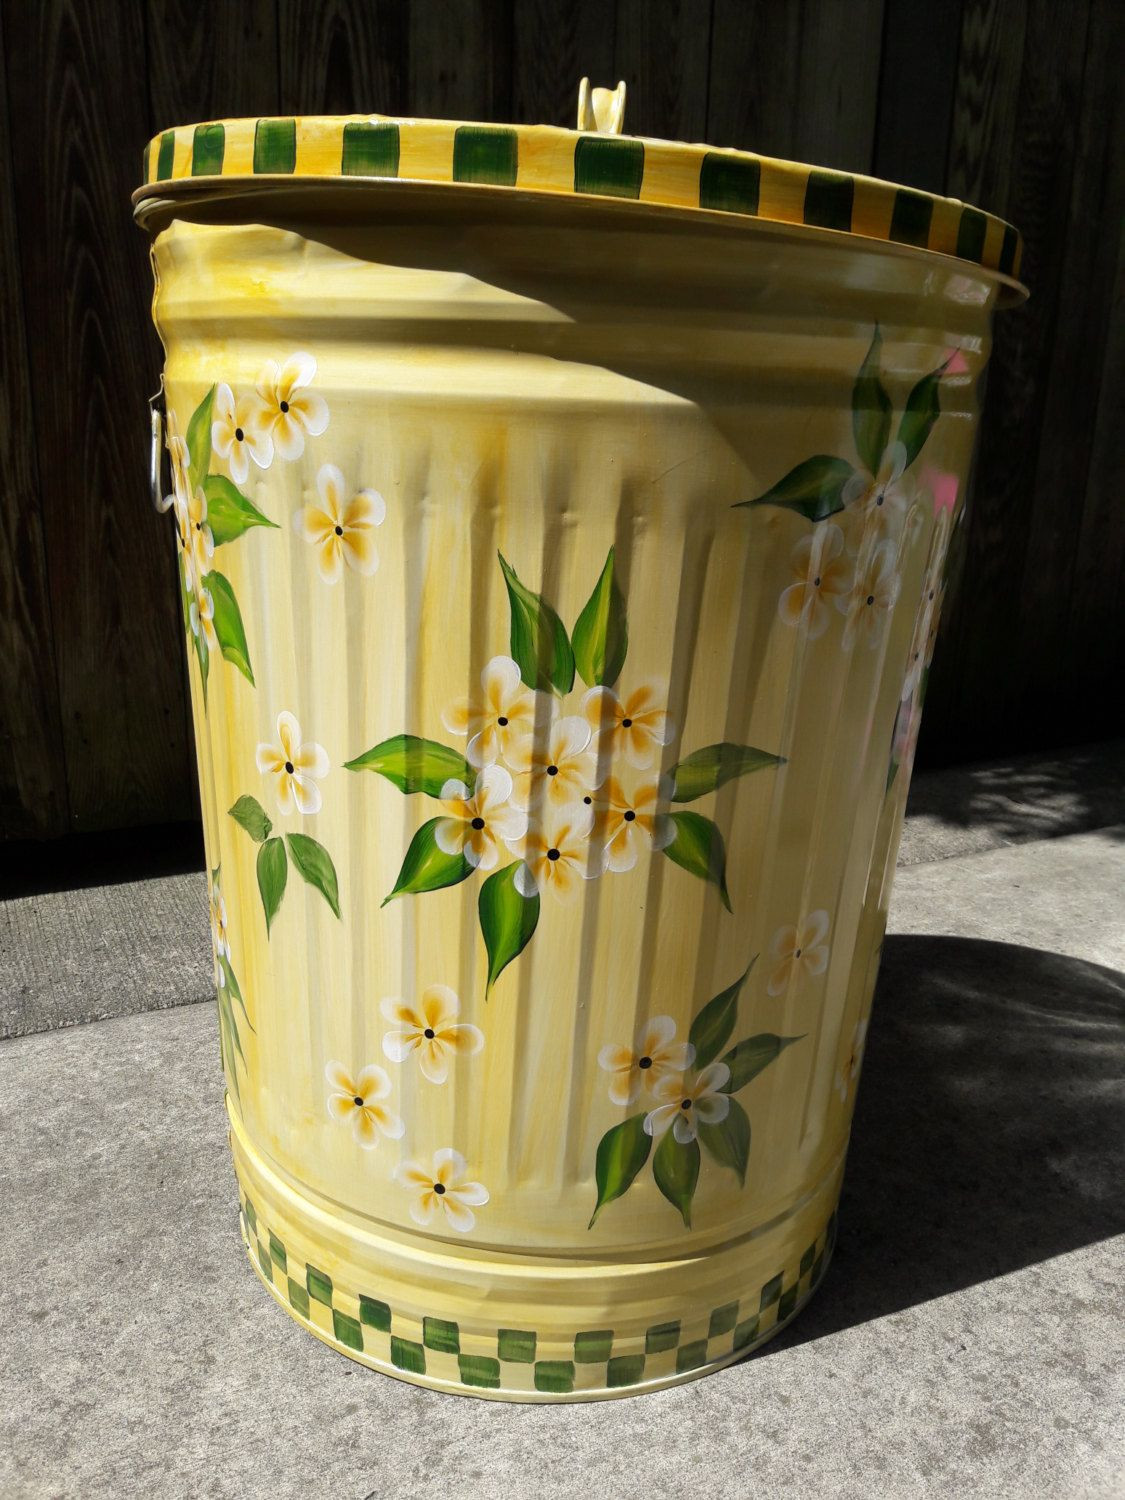 15 Stylish Galvanized Tin Wall Vase 2024 free download galvanized tin wall vase of 30 gallon decorative hand painted galvanized metal trash can w side throughout 30 gallon decorative hand painted galvanized metal trash can w side handles and